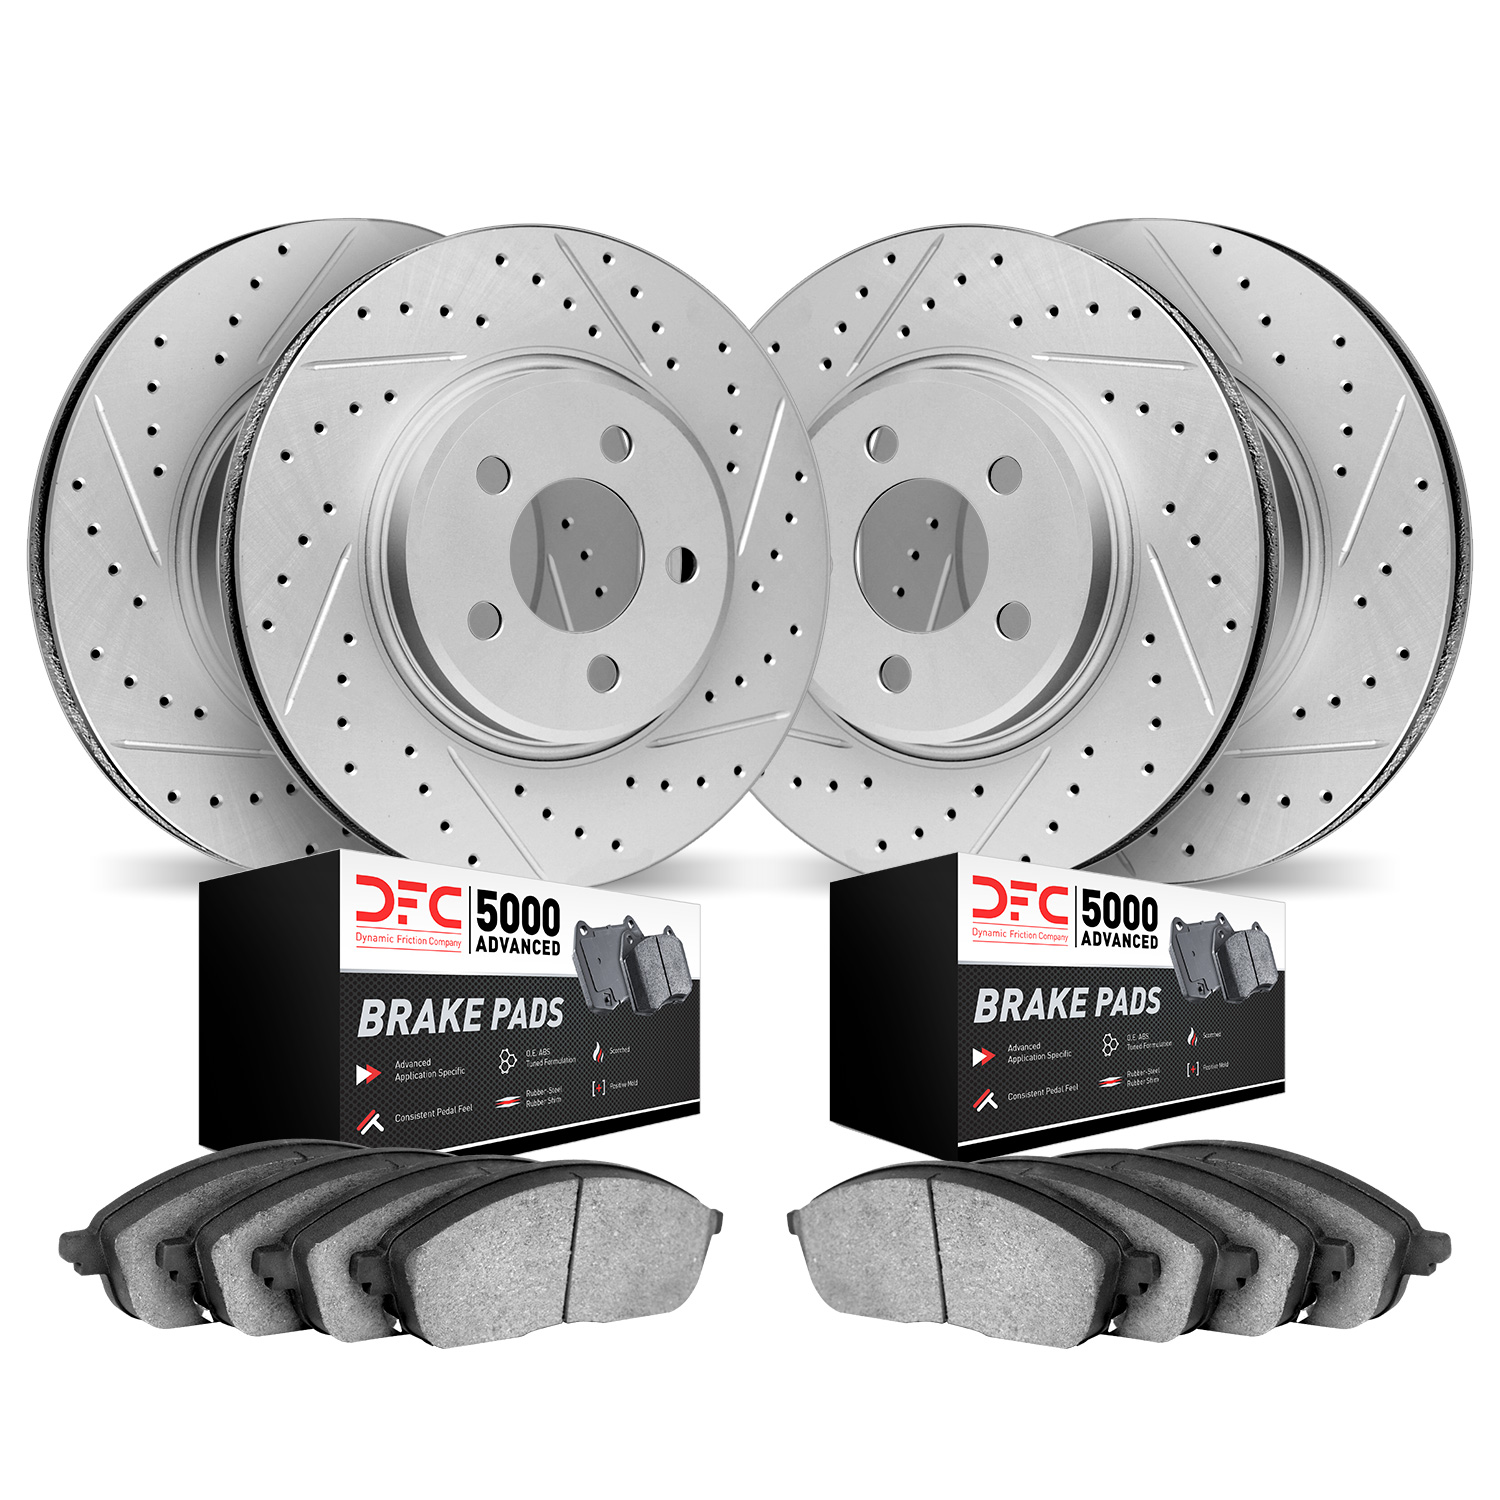 2504-31069 Geoperformance Drilled/Slotted Rotors w/5000 Advanced Brake Pads Kit, 2007-2013 BMW, Position: Front and Rear